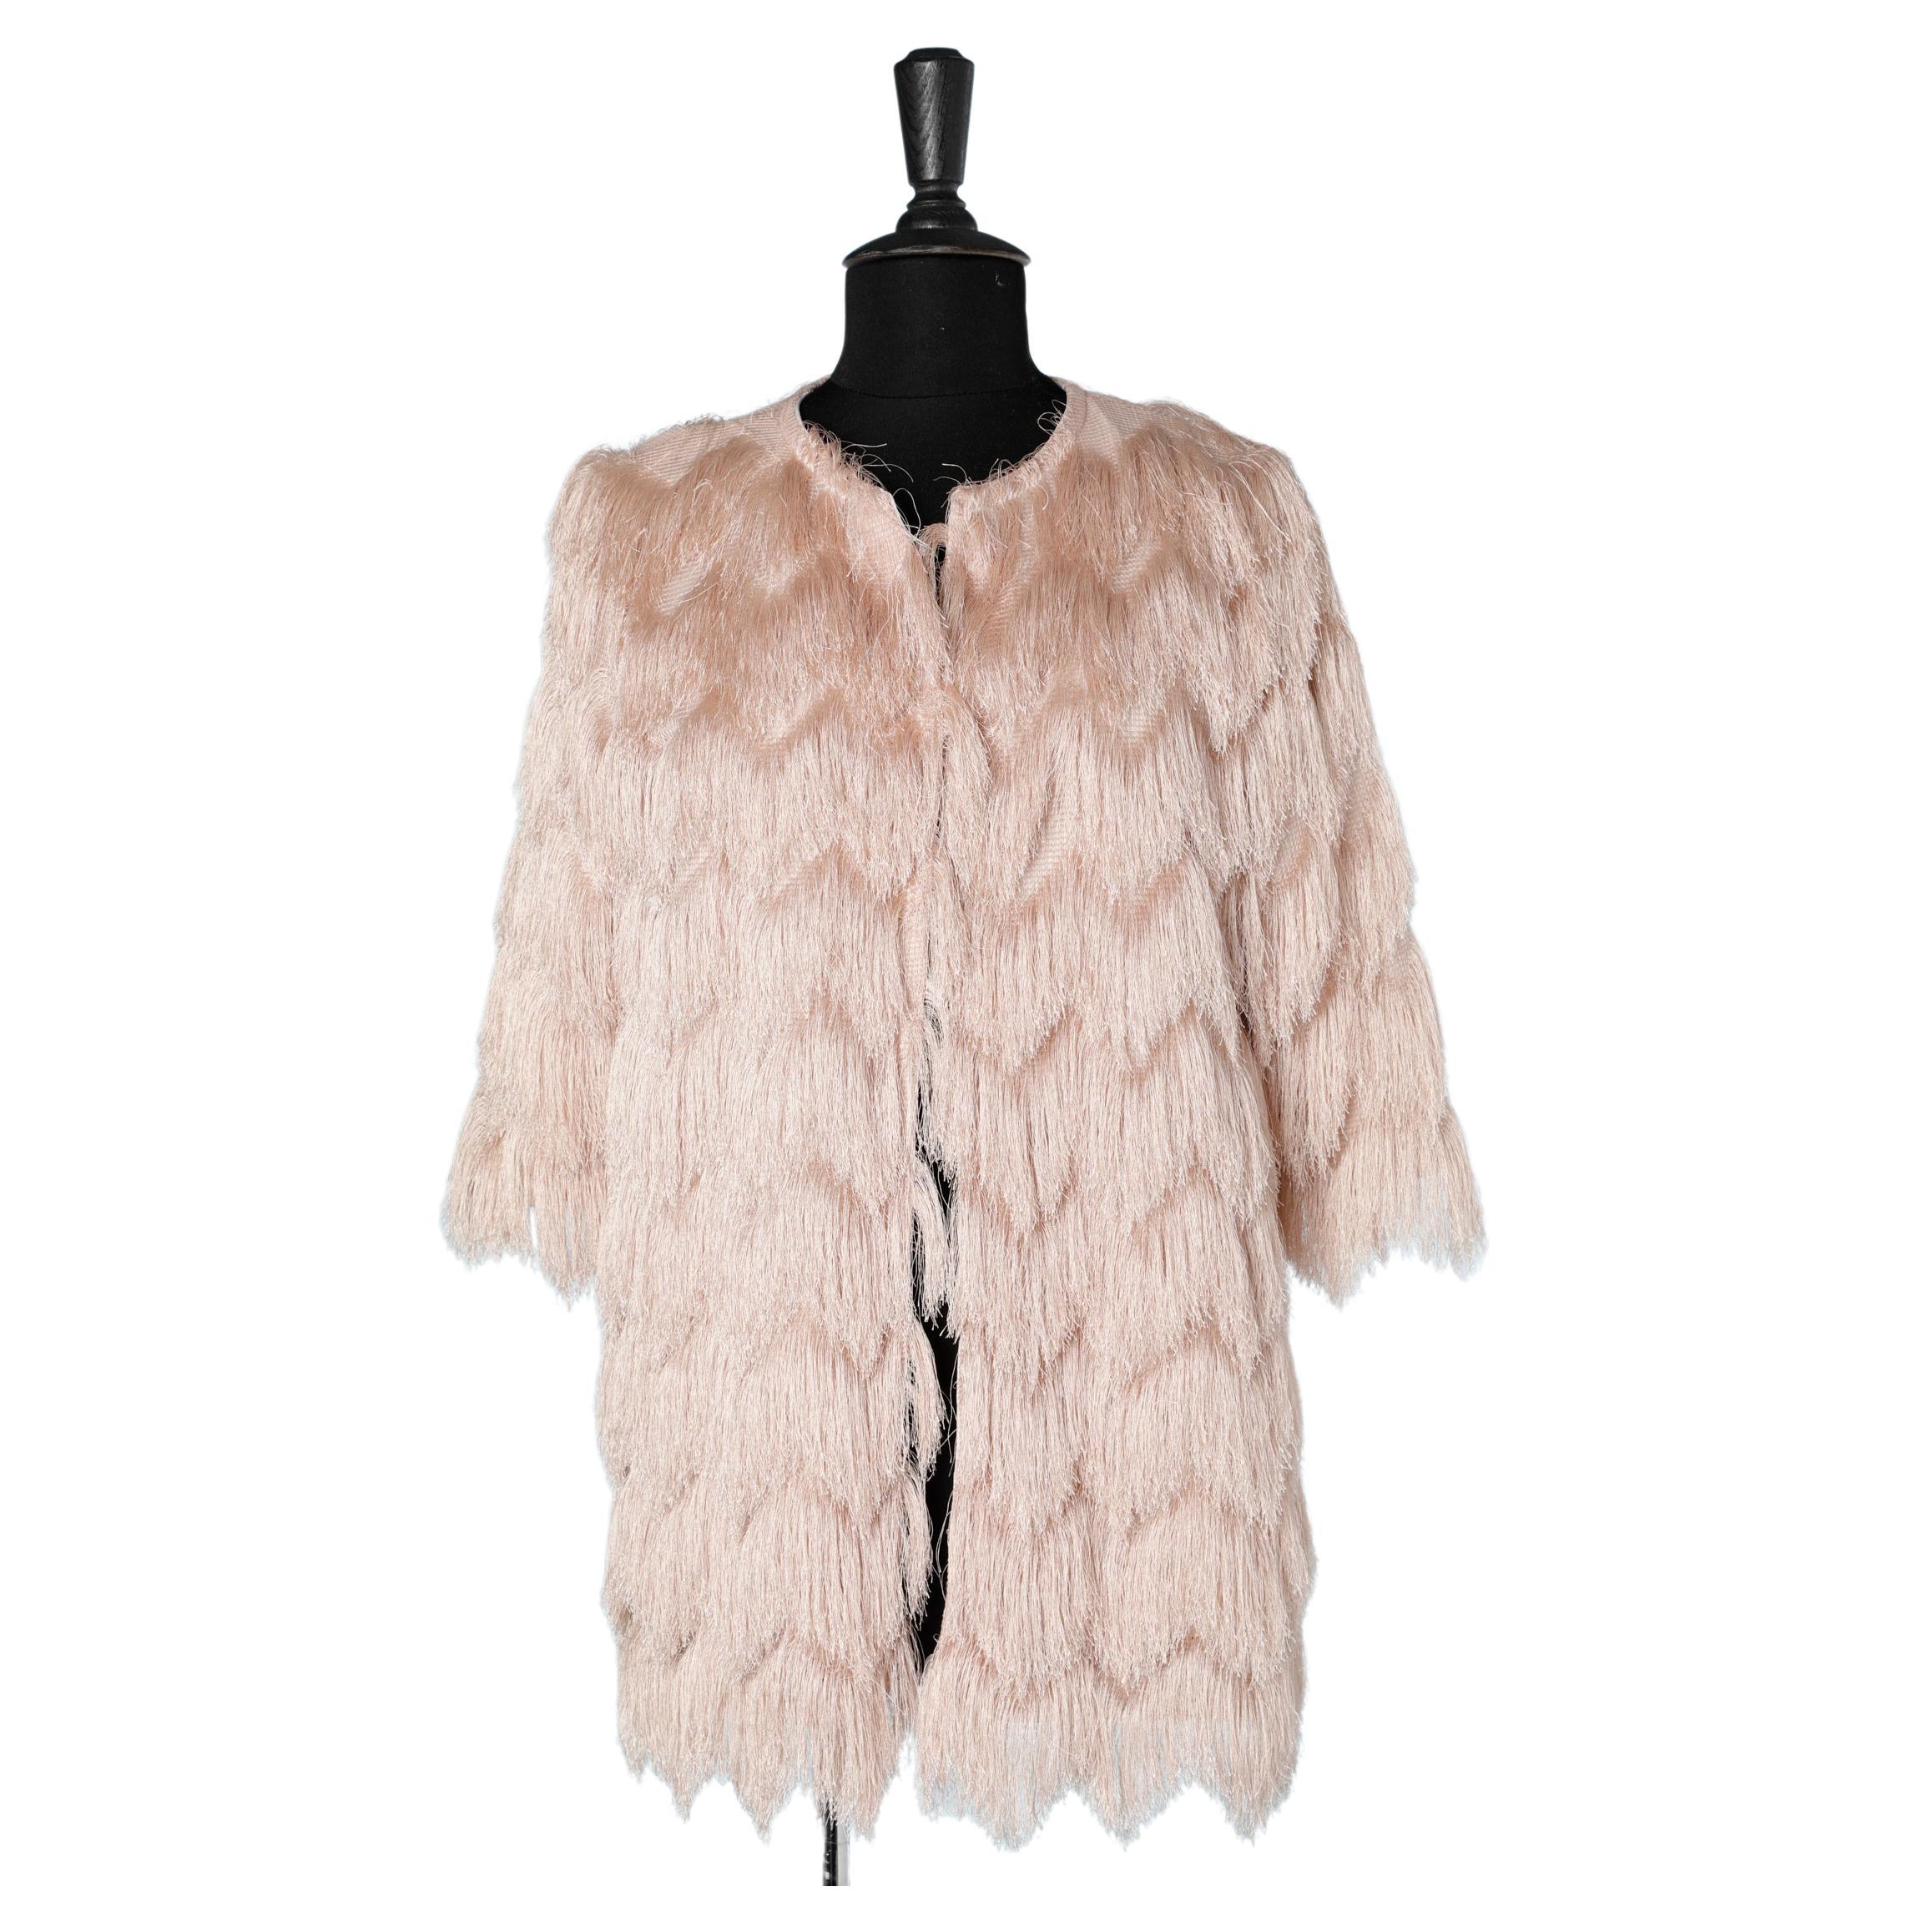 Evening jacket in pale pink silk threads fringes with silk jacquard lining